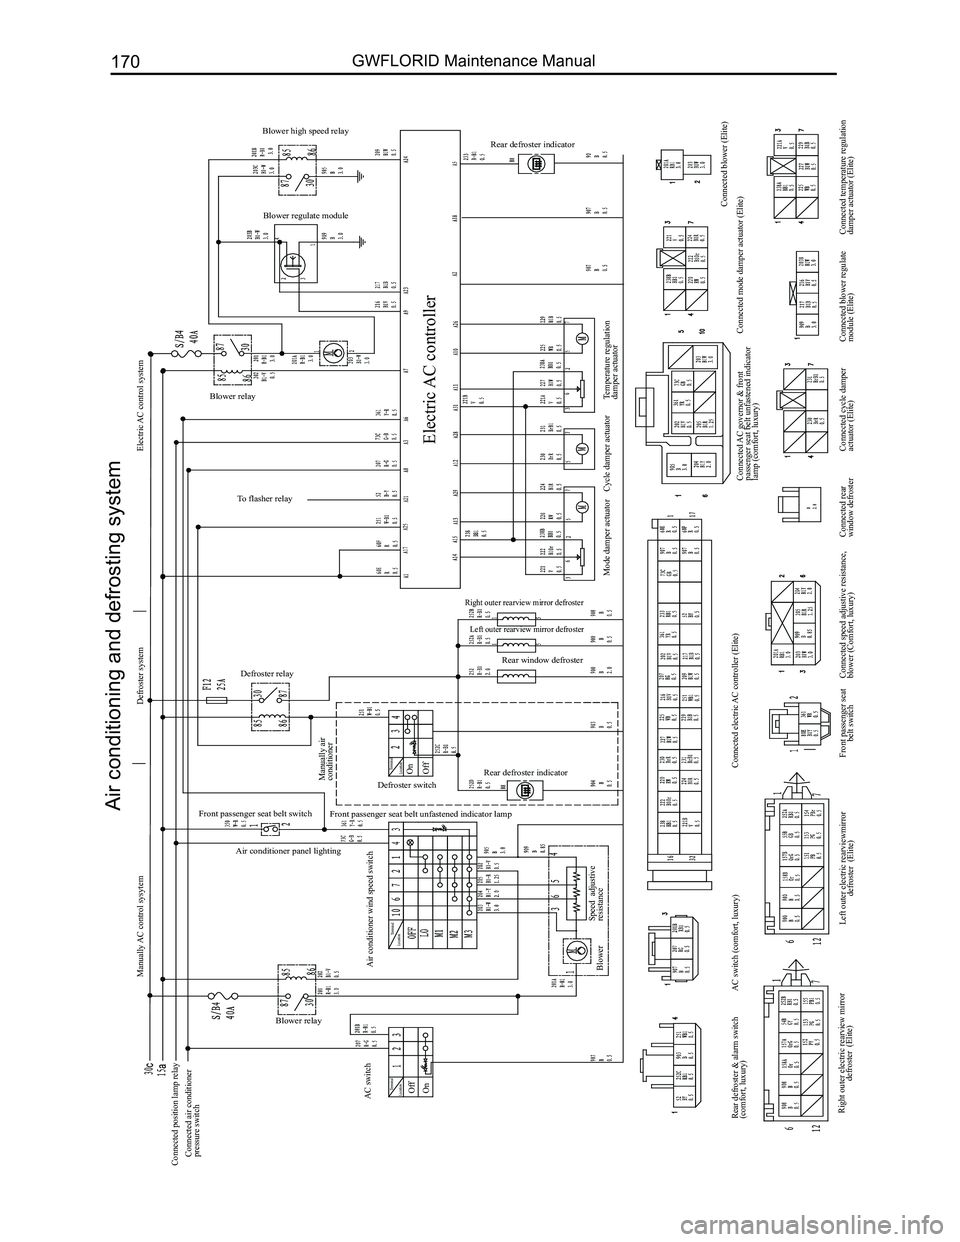 GREAT WALL FLORID 2008  Service Manual Downloaded from www.Manualslib.com manuals search engine GWFLORID Maintenance Manual170
Air conditioning and defrosting system
Rear window defroster
Connected position lamp relay Manually AC control s